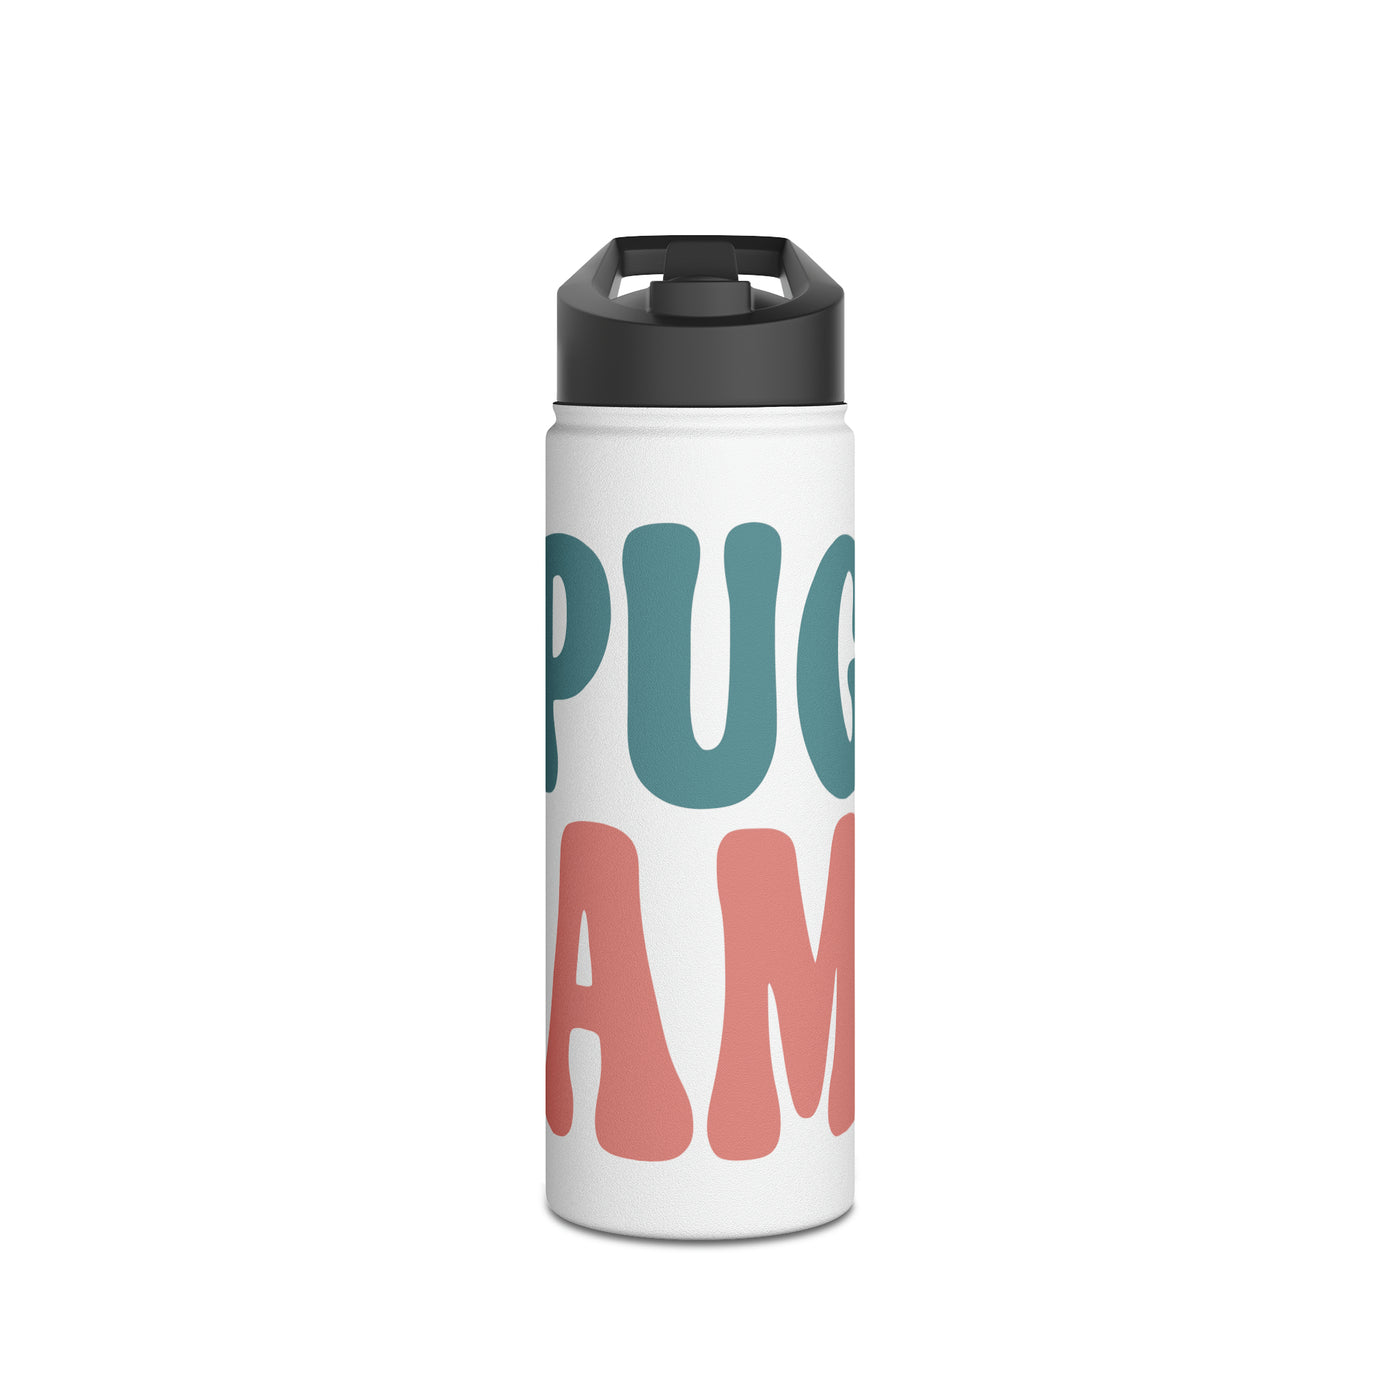 Pug Mama Colored Print Water Bottle